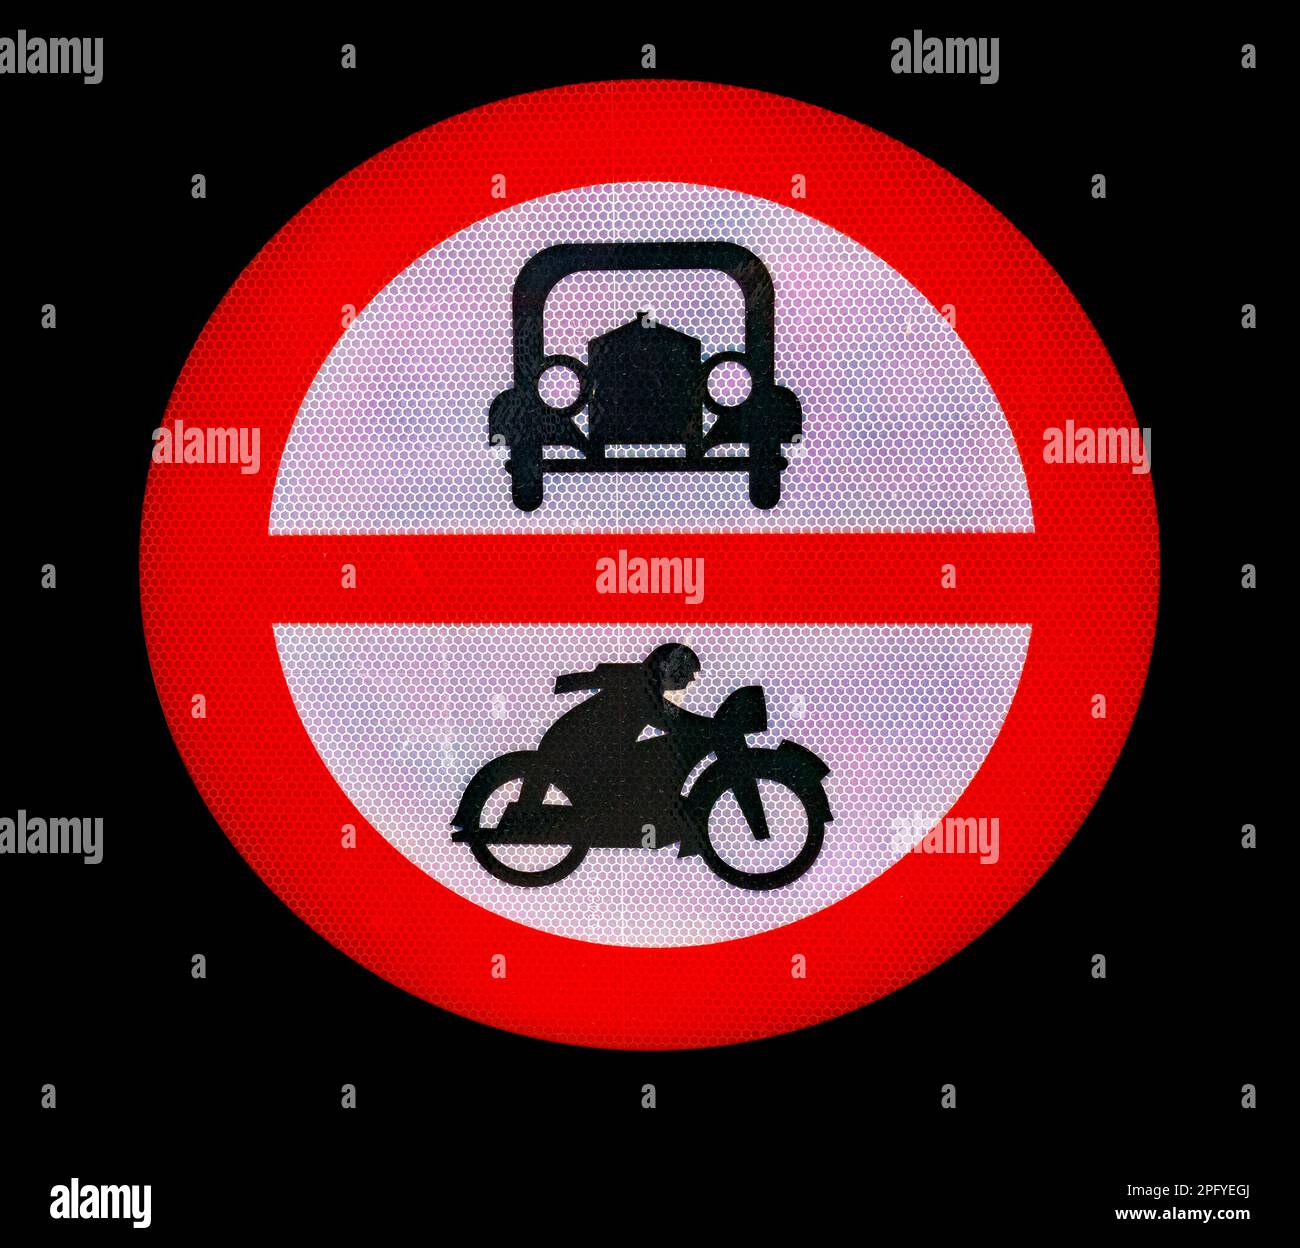 Traffic signs forbidden passage for cars and motorcycles on black background, old symbols Stock Photo